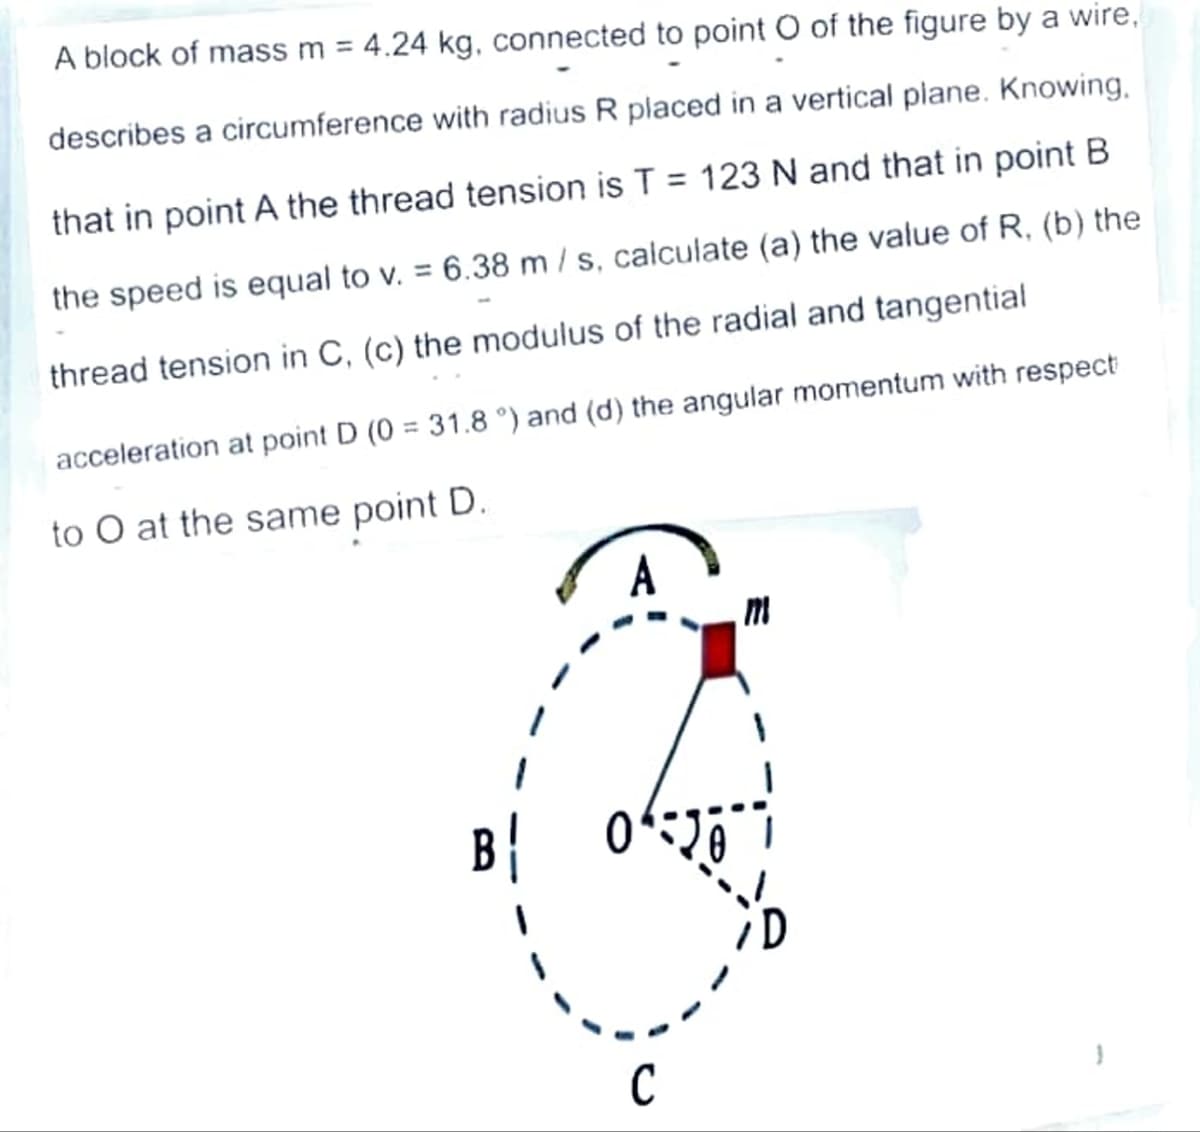 A block of mass m = 4.24 kg, connected to point O of the figure by a wire,
describes a circumference with radius R placed in a vertical plane. Knowing.
that in point A the thread tension is T = 123 N and that in point B
the speed is equal to v. = 6.38 m / s, calculate (a) the value of R, (b) the
thread tension in C, (c) the modulus of the radial and tangential
acceleration at point D (0 = 31.8 °) and (d) the angular momentum with respect
to O at the same point D.
20⁰
C
D